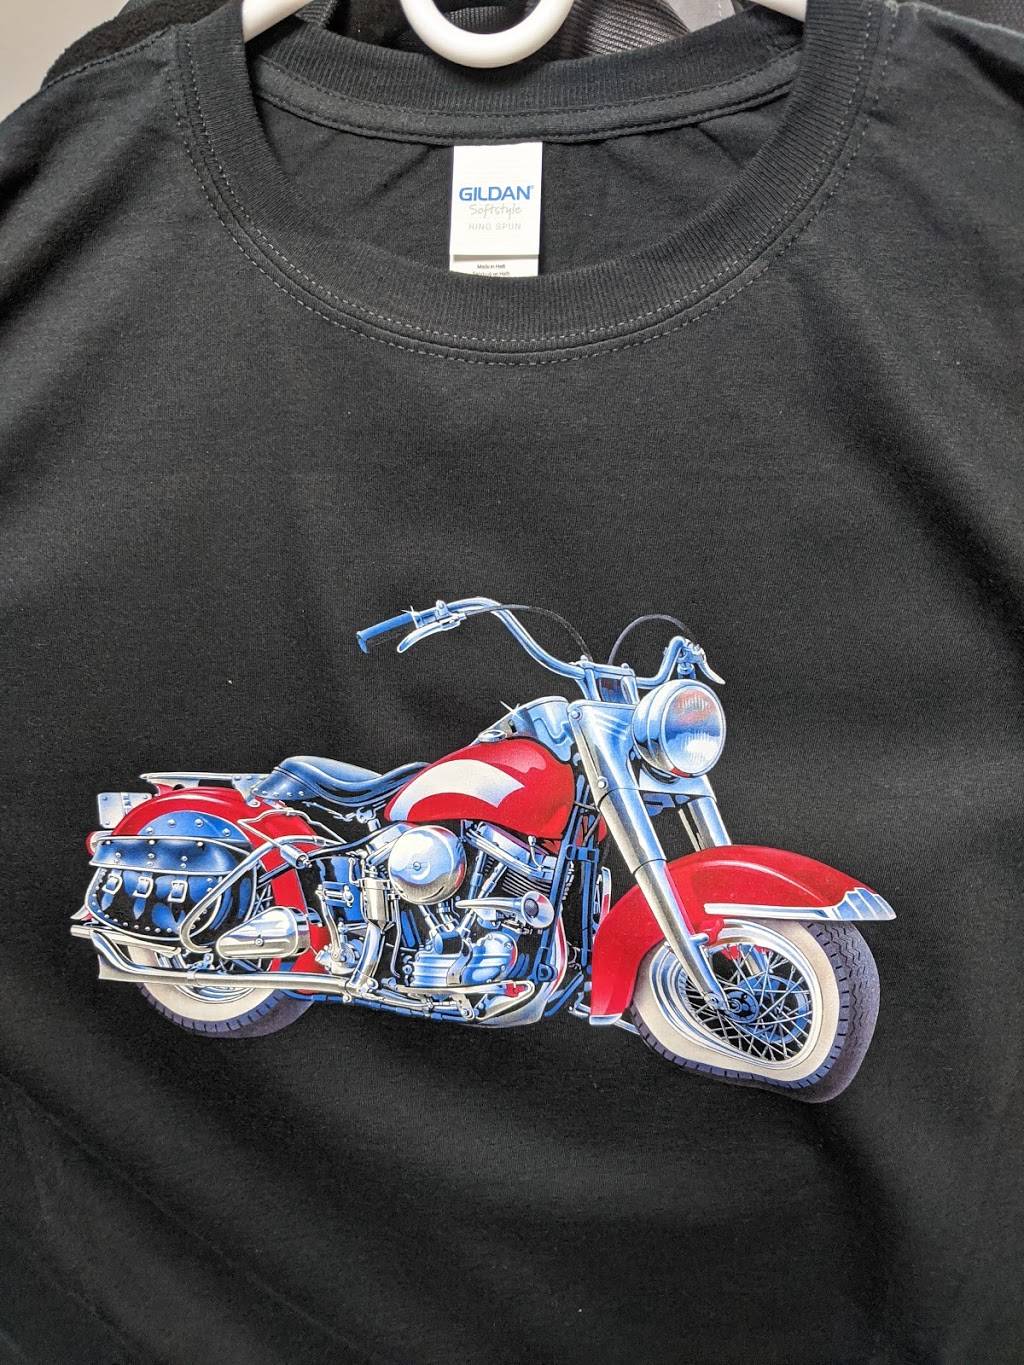 Hines Screen Printing and Embroidery | 4243 Sunbeam Rd #5, Jacksonville, FL 32257, USA | Phone: (904) 398-5110